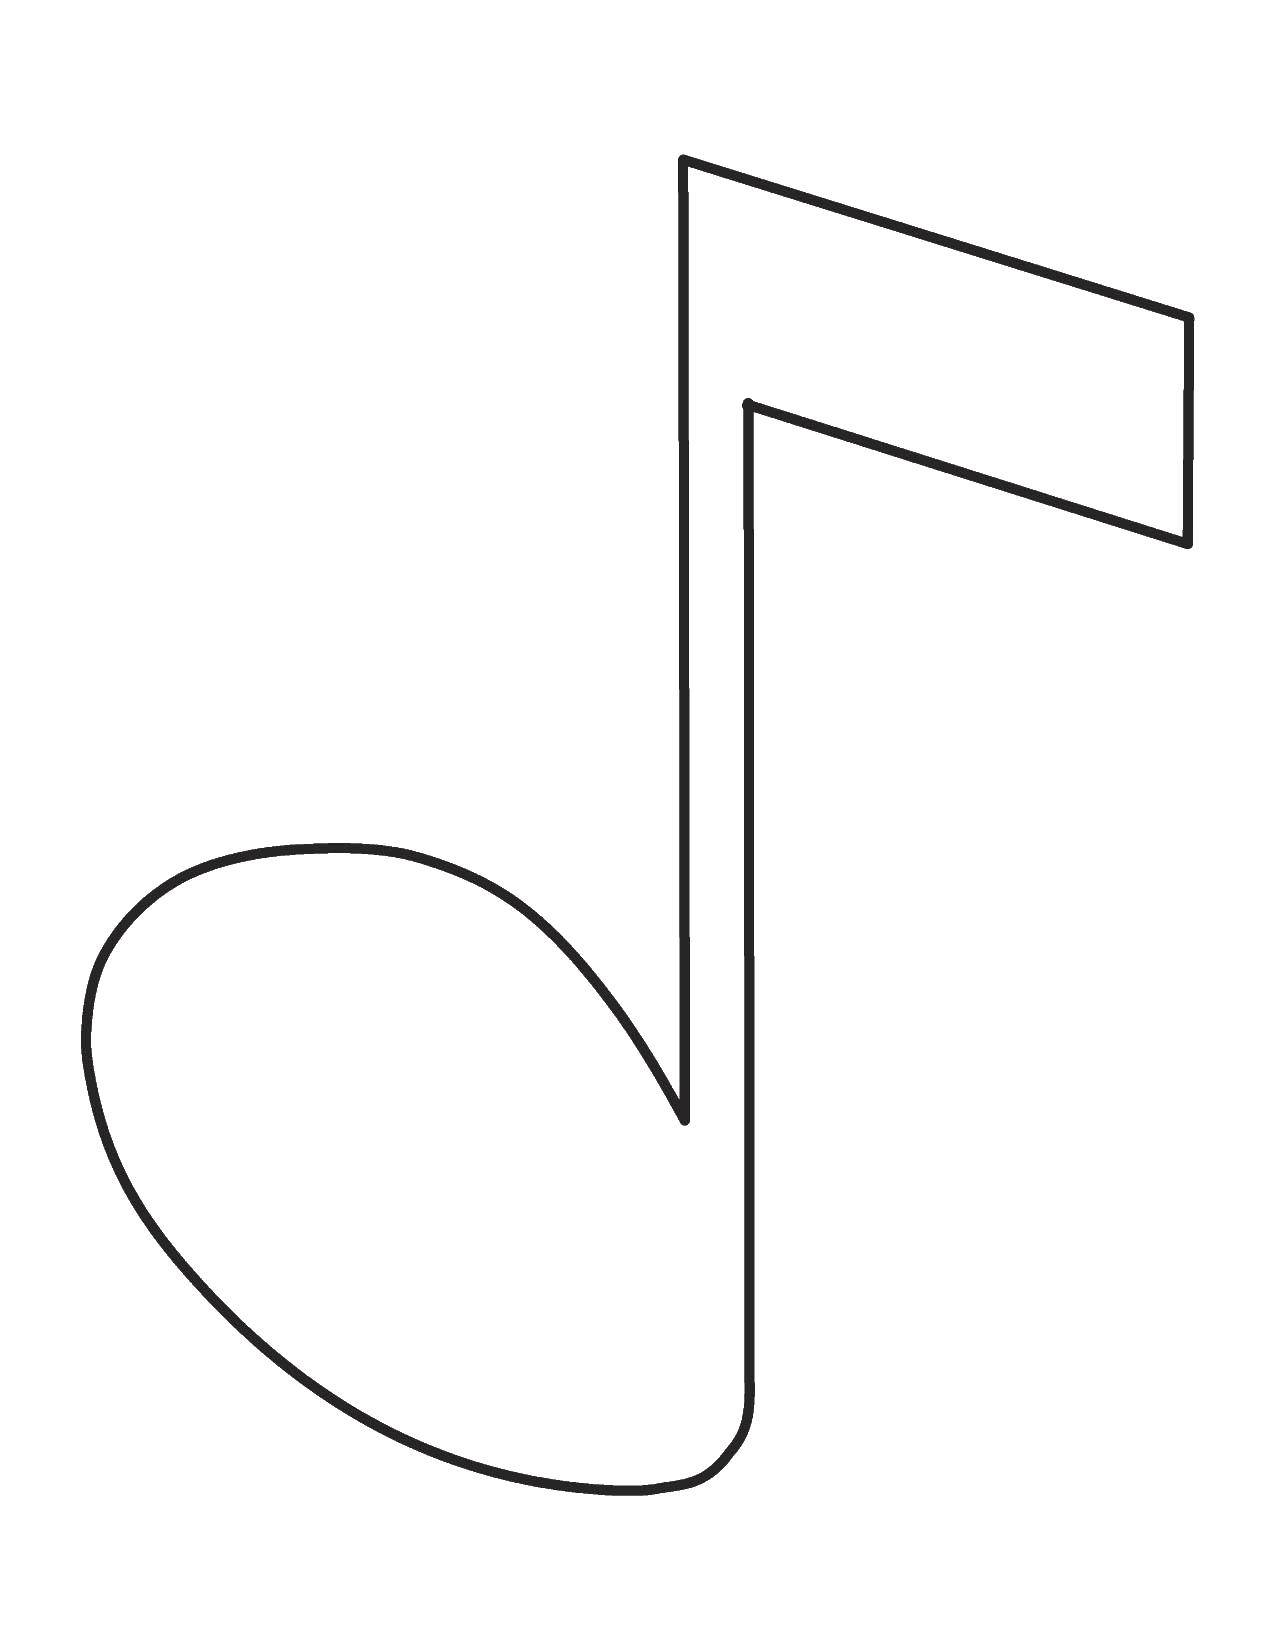 Coloring Note. Category Music. Tags:  music, notes.